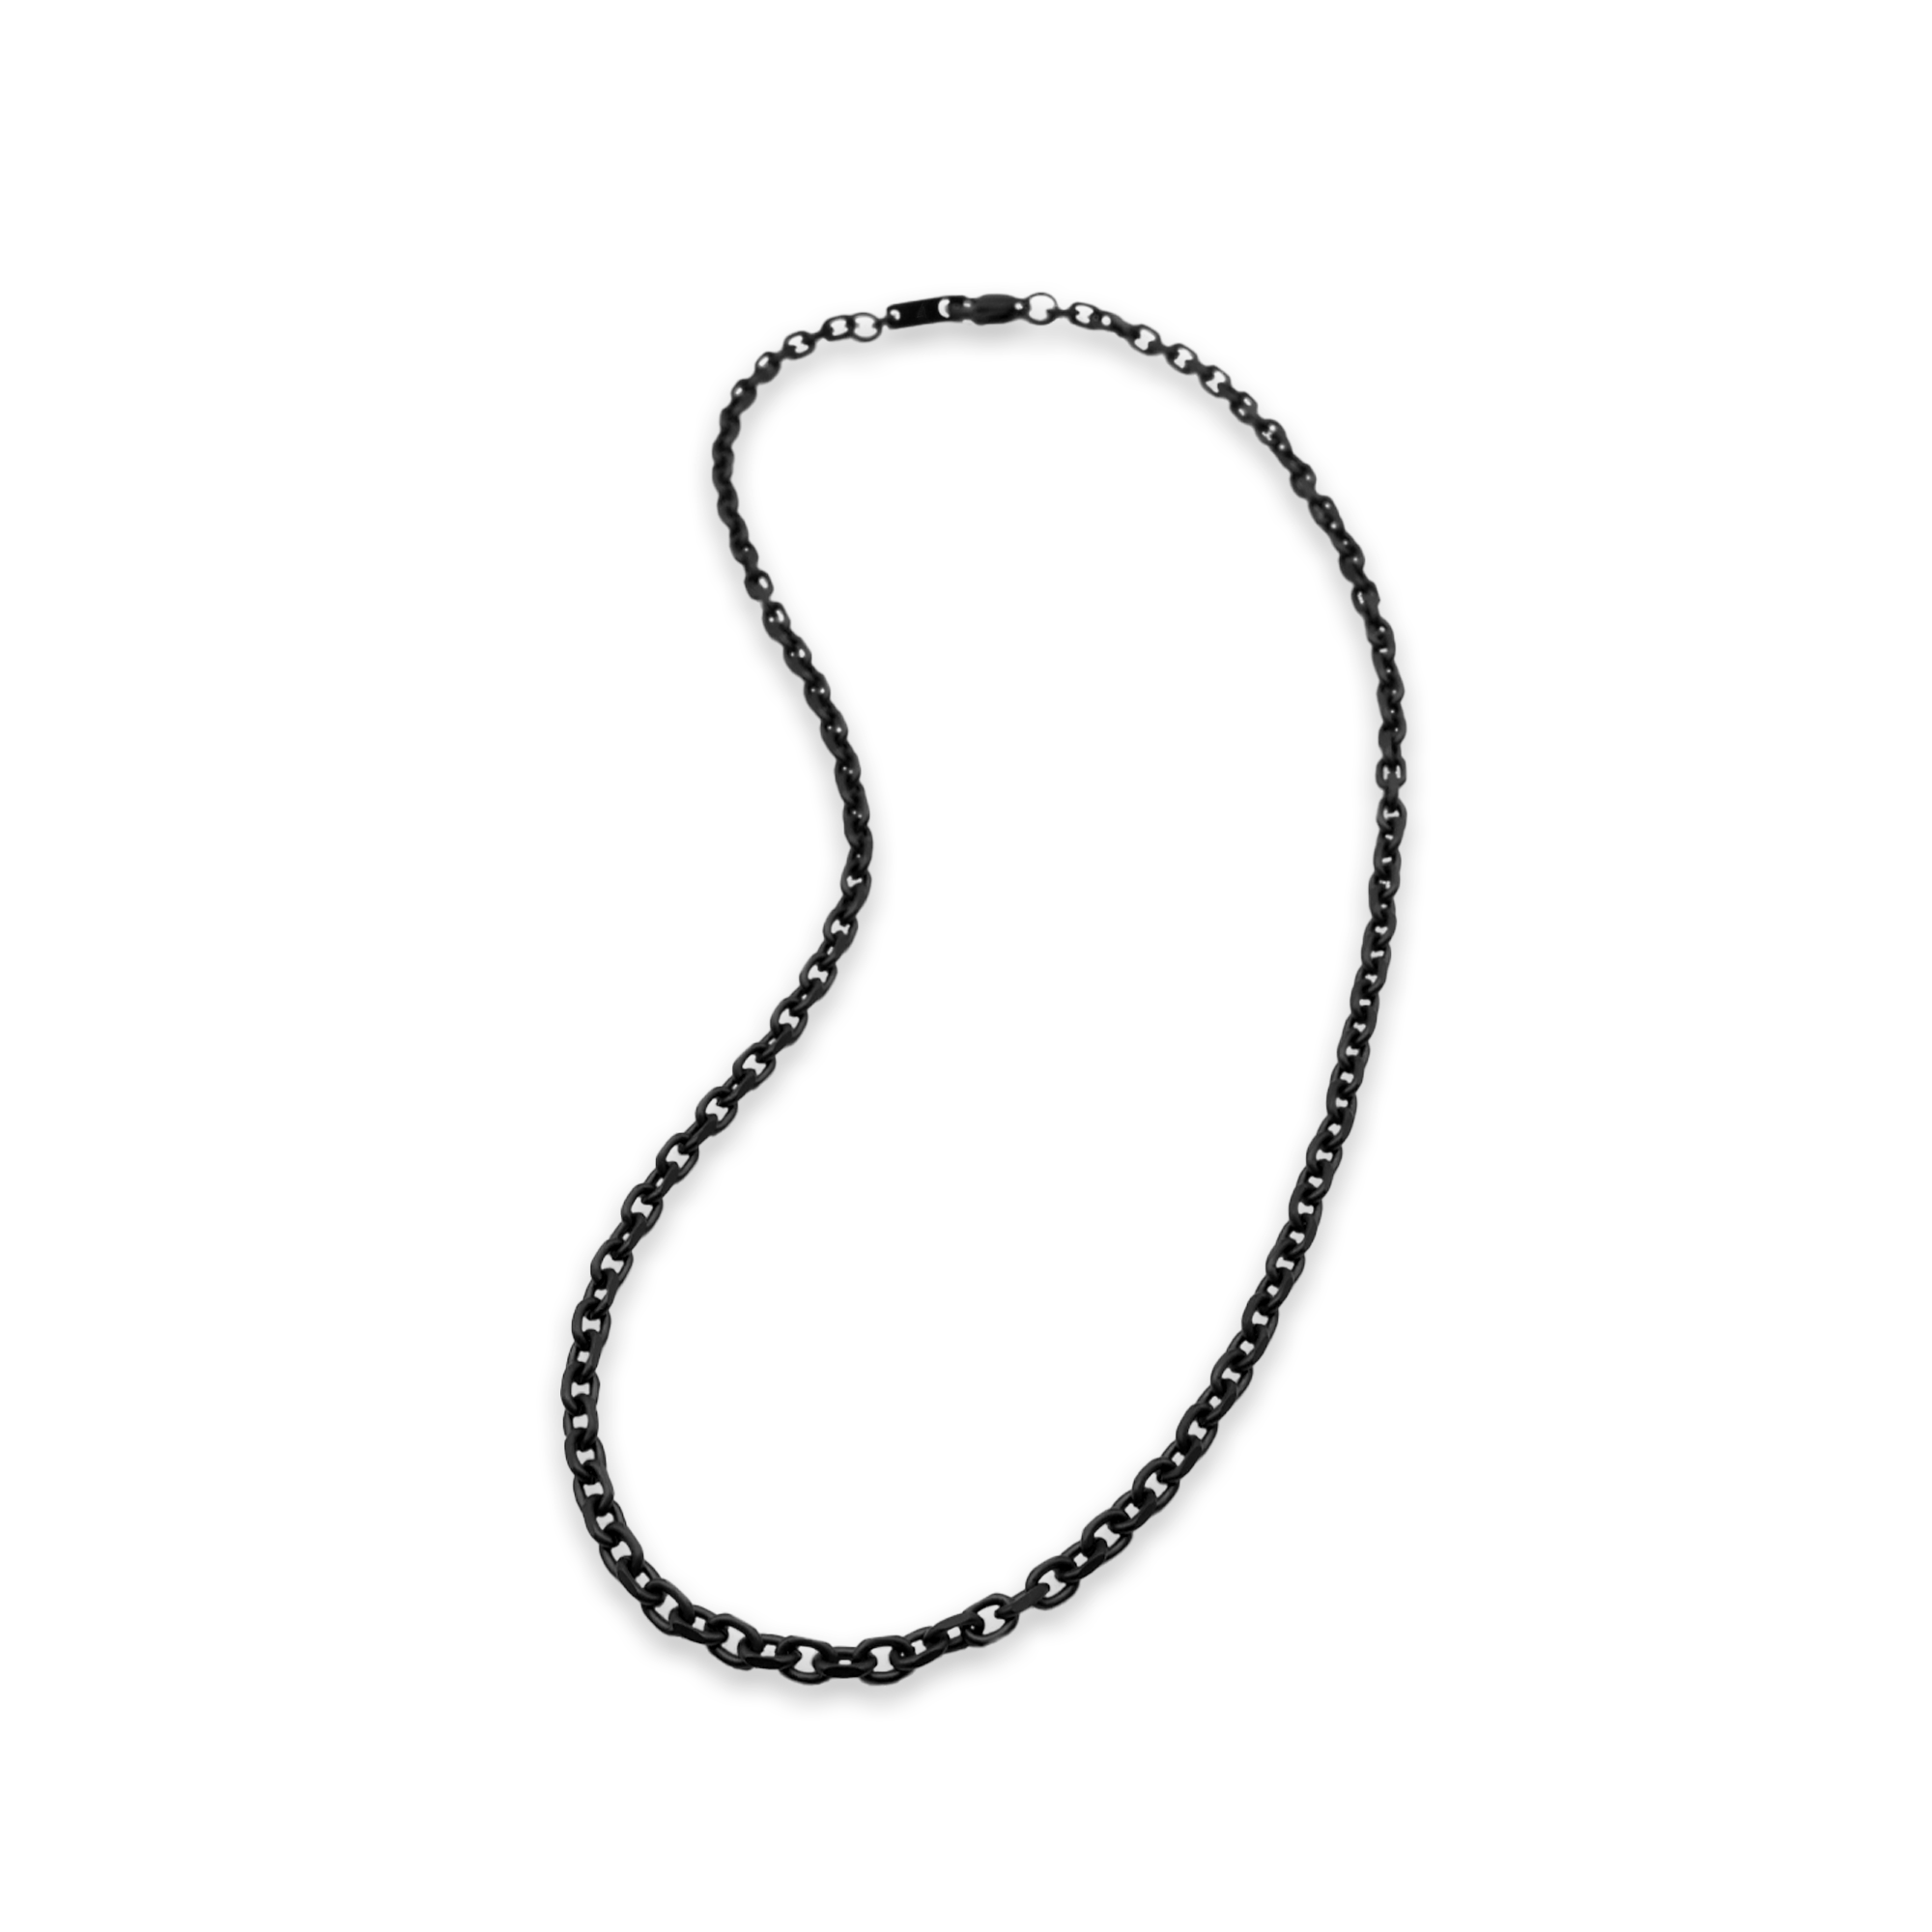 CABLE CHAIN - 3.8MM